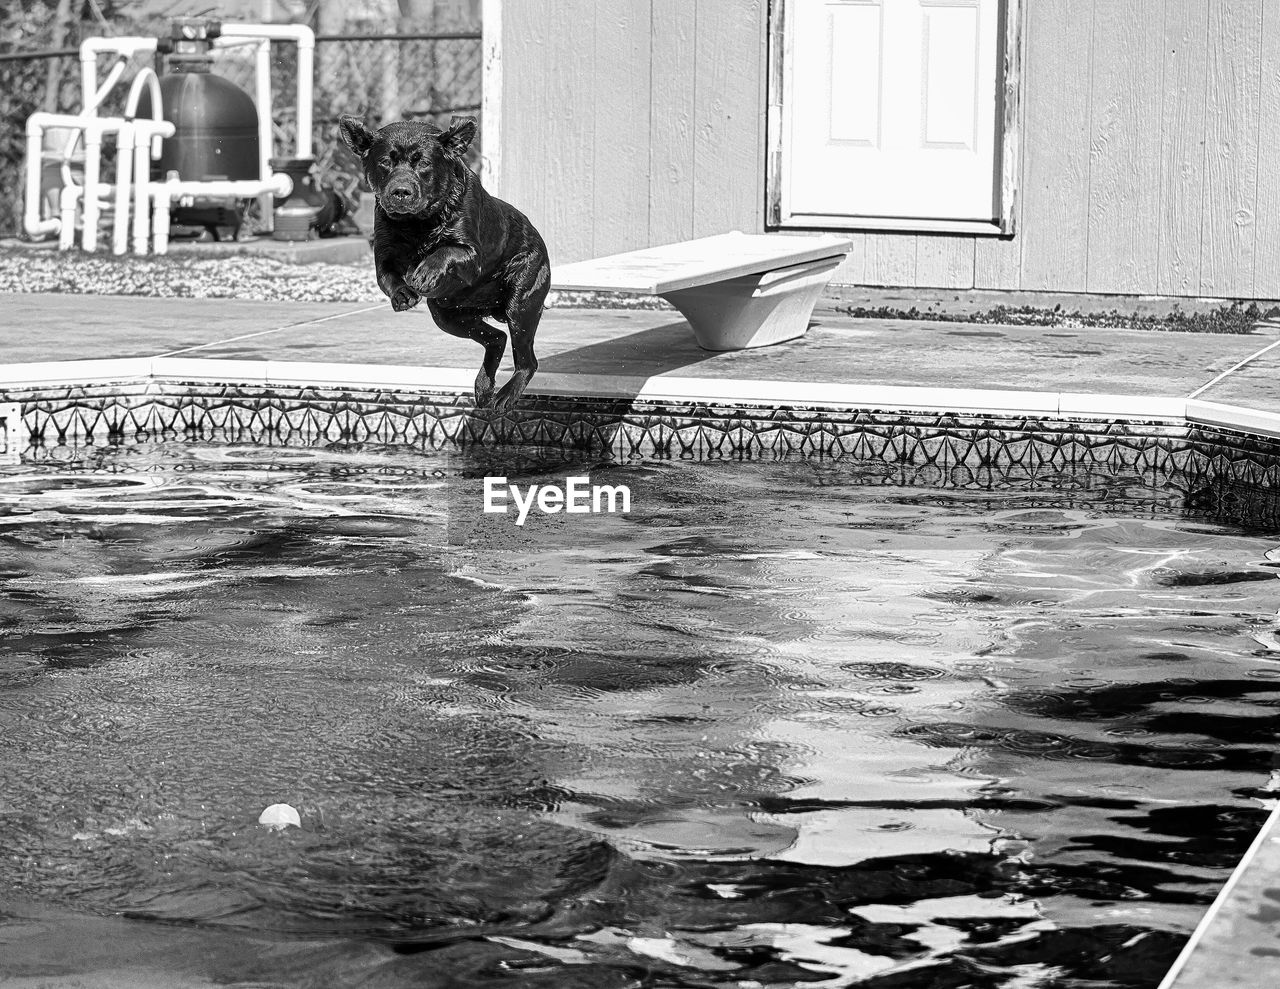 Dog jumping into pool